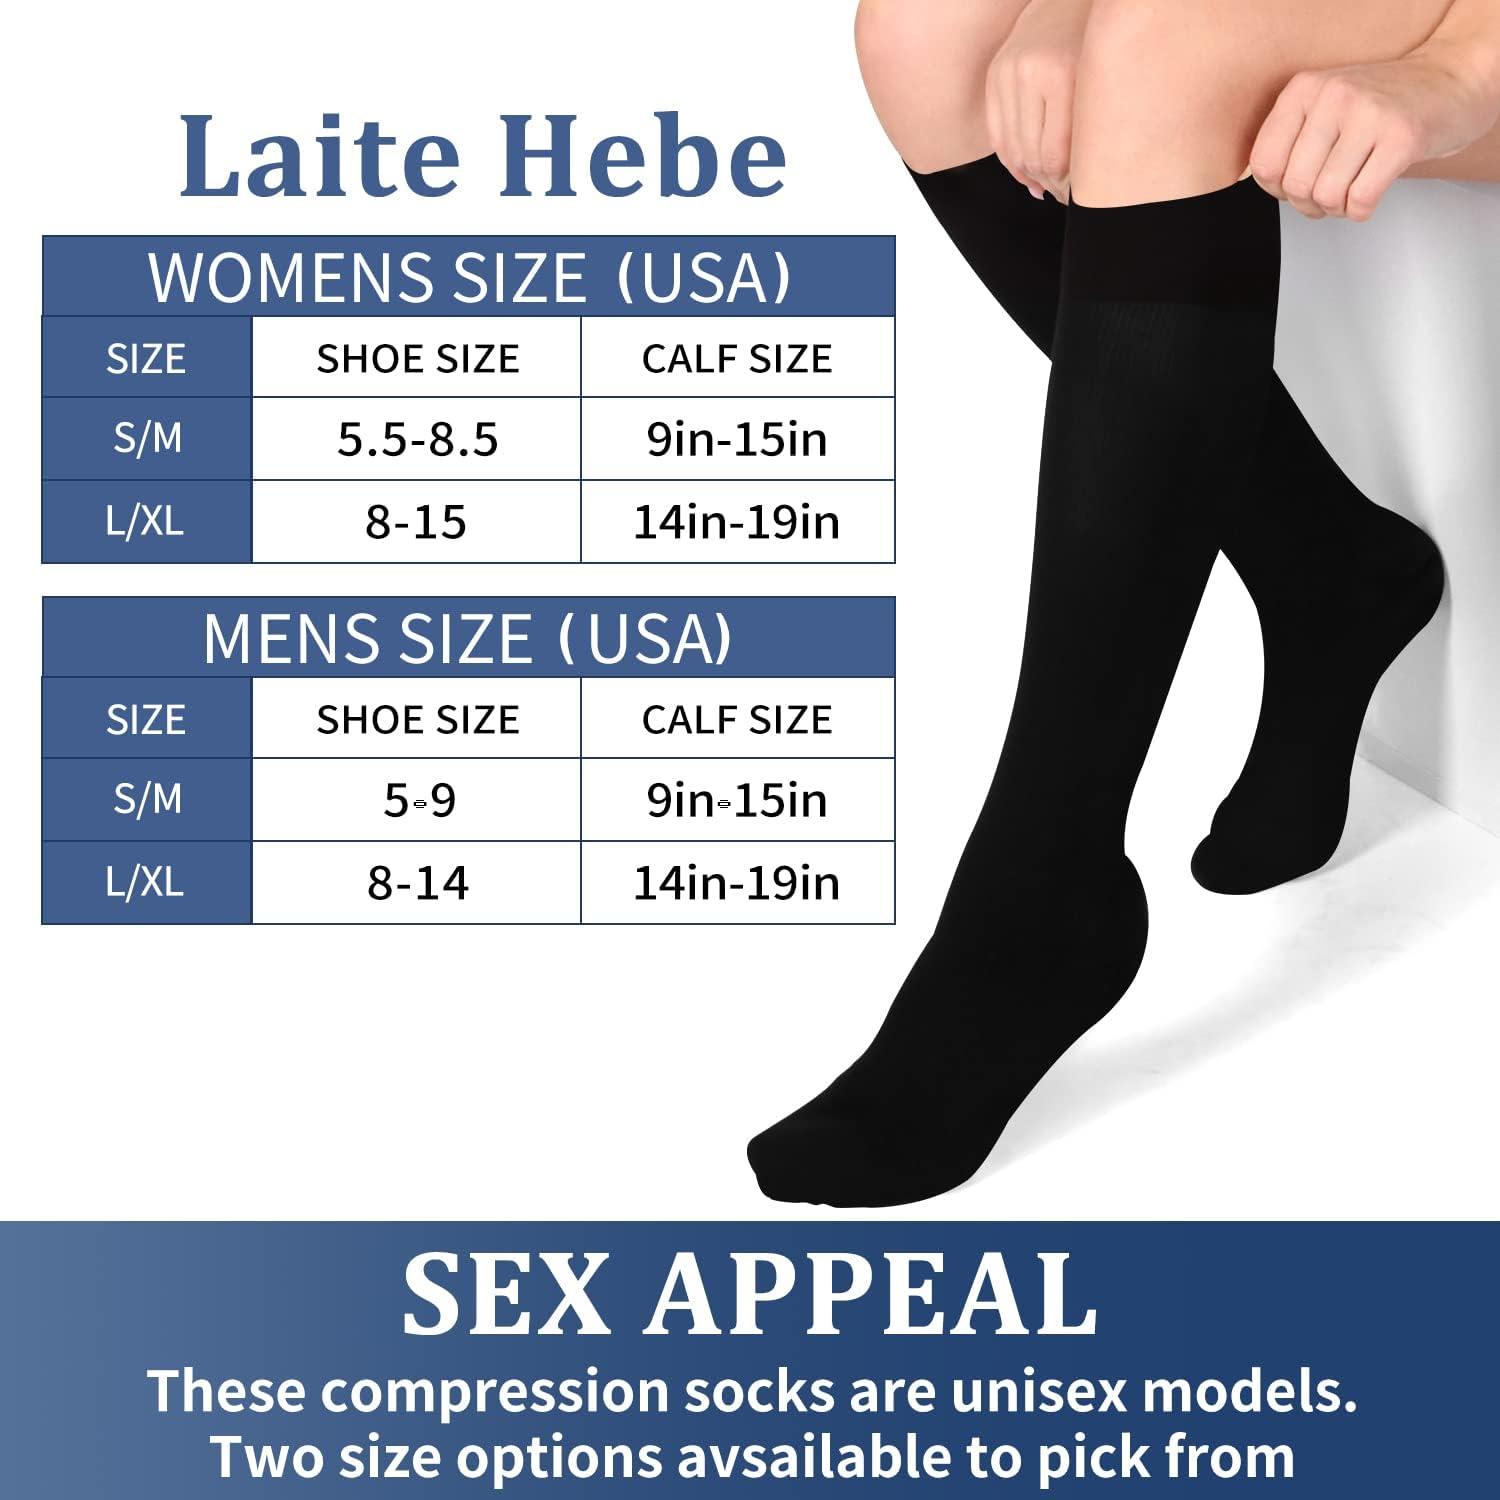 Laite Hebe 4 Pairs-Compression Socks for Women&Men Circulation-Best Support  for Nurses,Running,Athletic 05-black/White/Grey/Navy Small-Medium